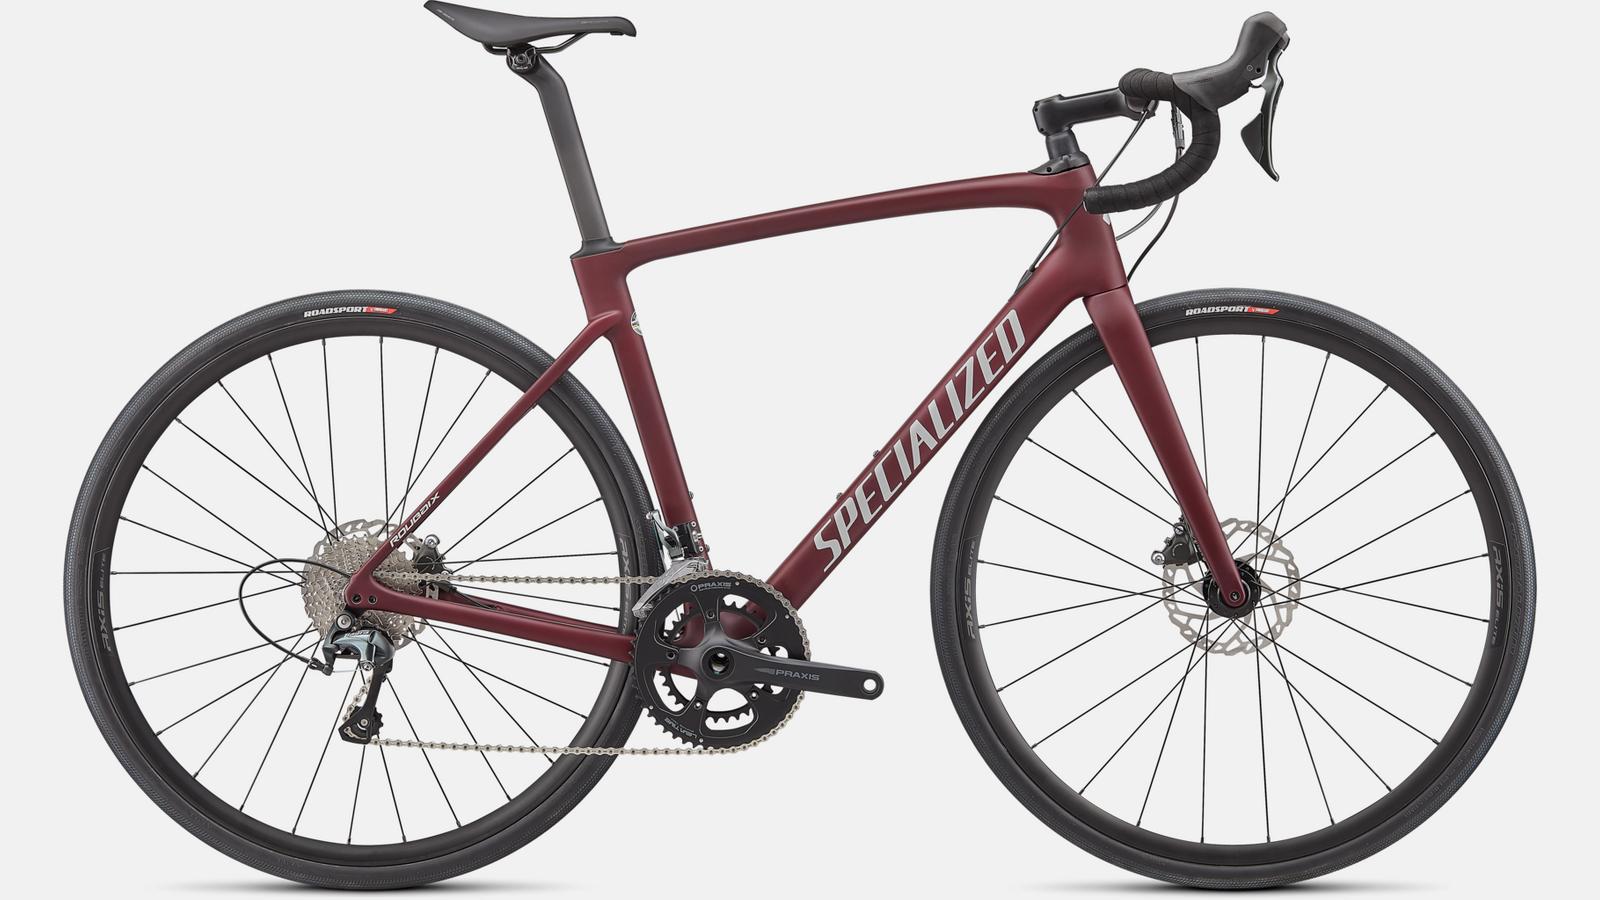 Paint for 2022 Specialized Roubaix - Satin Maroon